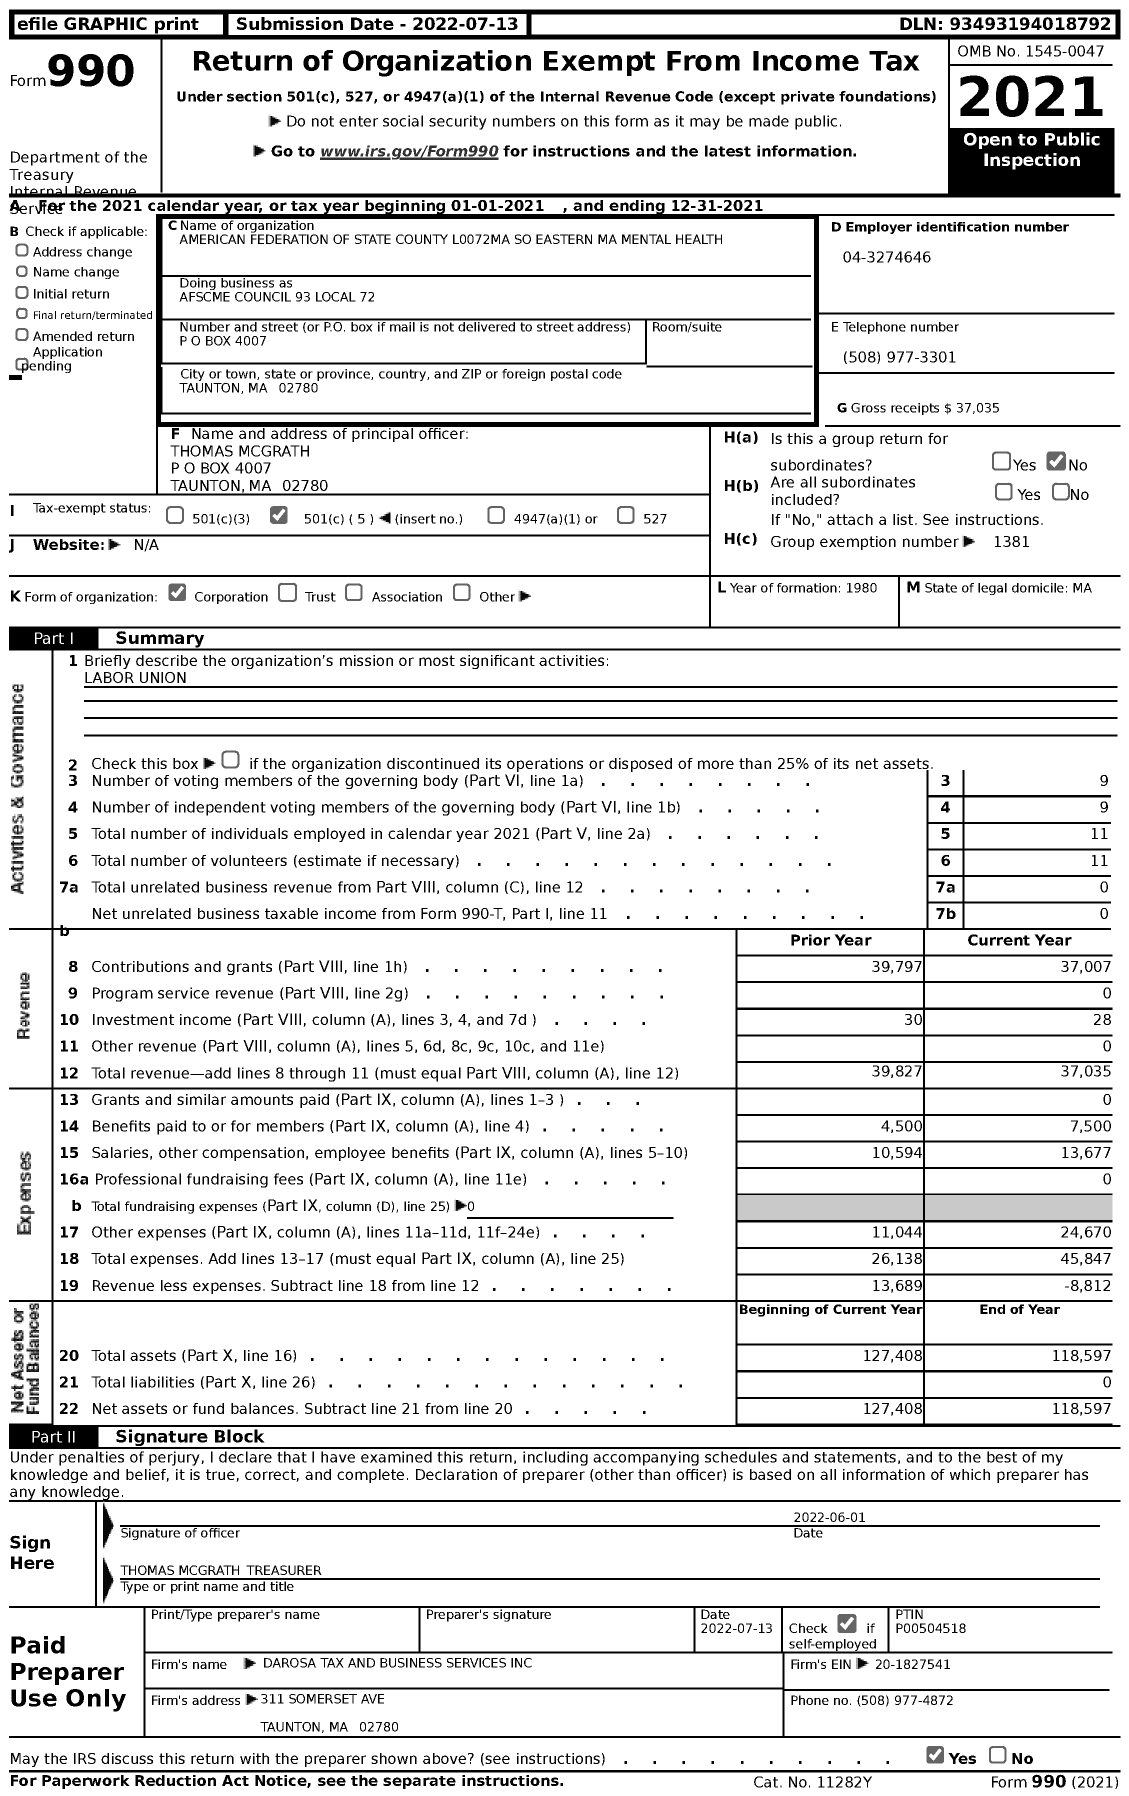 Image of first page of 2021 Form 990 for American Federation of State County & Municipal Employees - AFSCME Council 93 Local 72